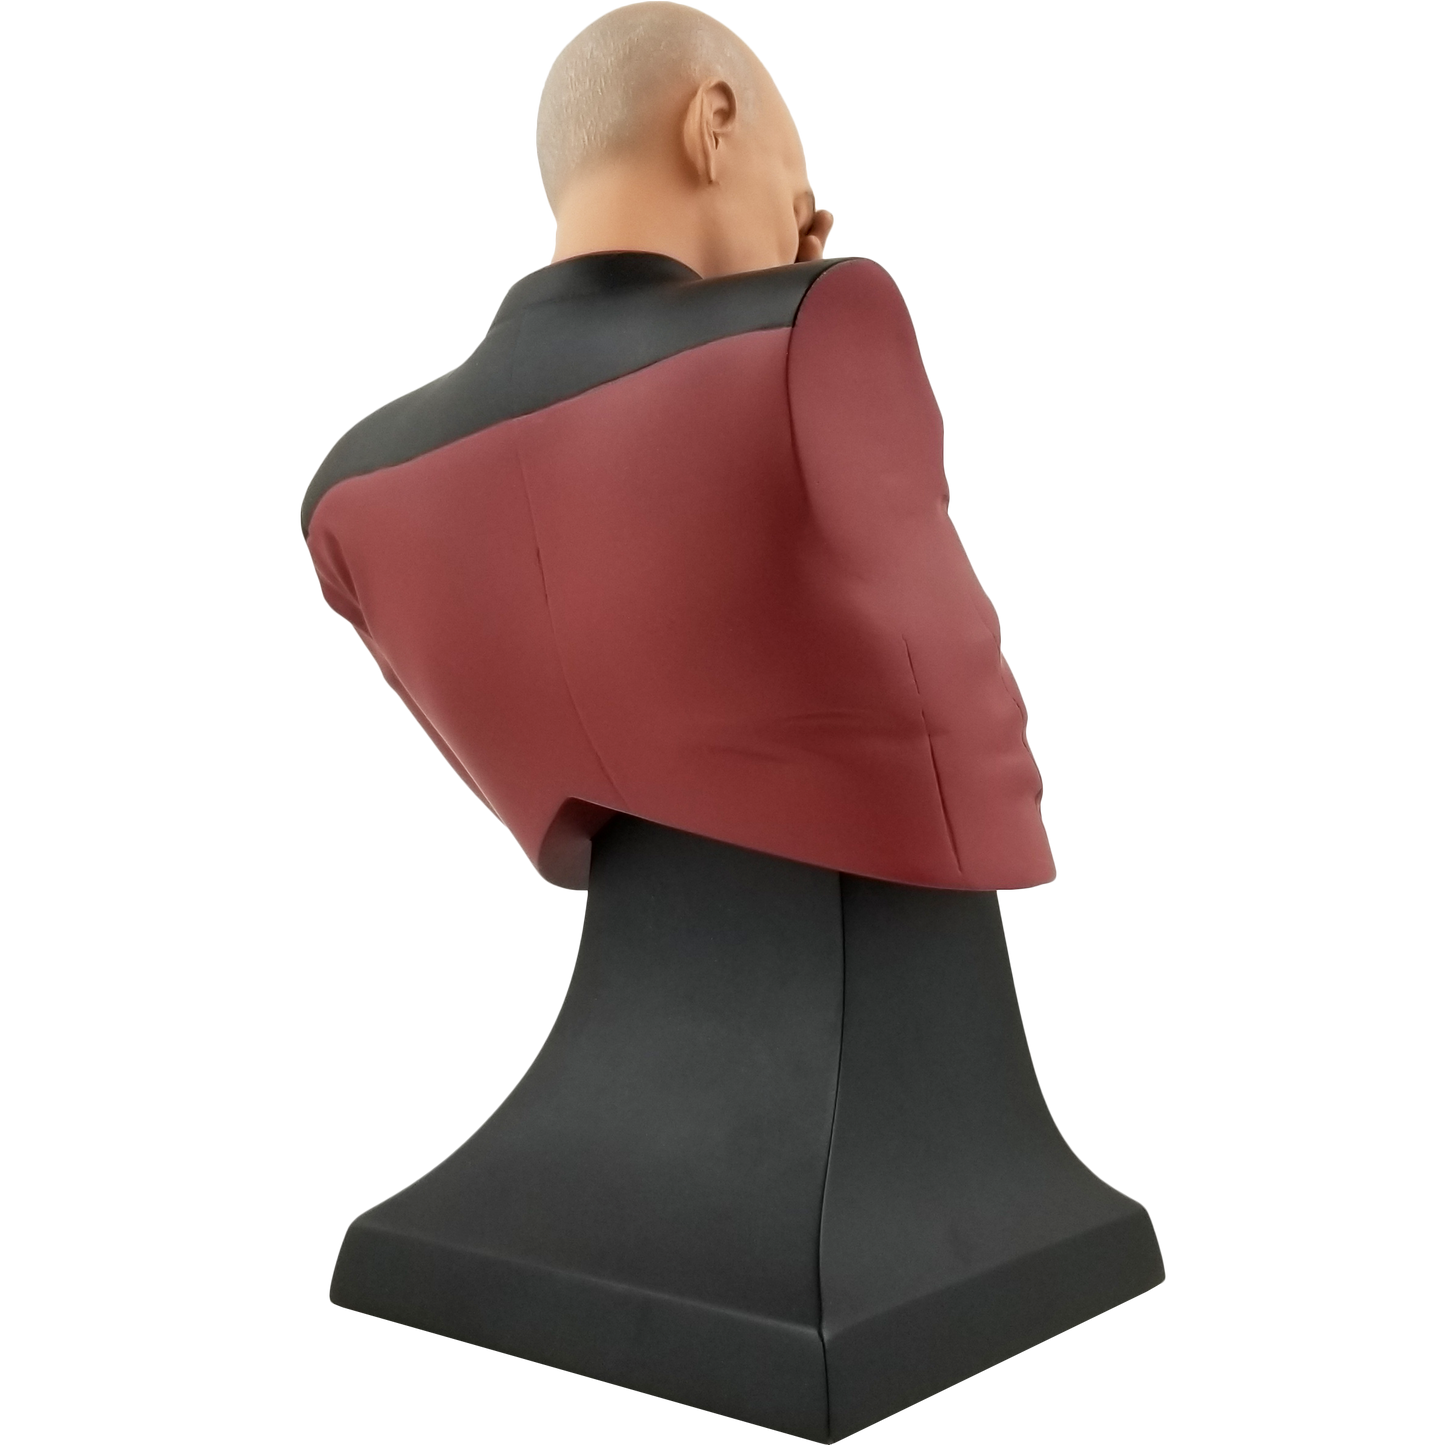 Star Trek The Next Generation Captain Picard Facepalm Bust Paperweight - Previews SDCC Exclusive - Icon Heroes 